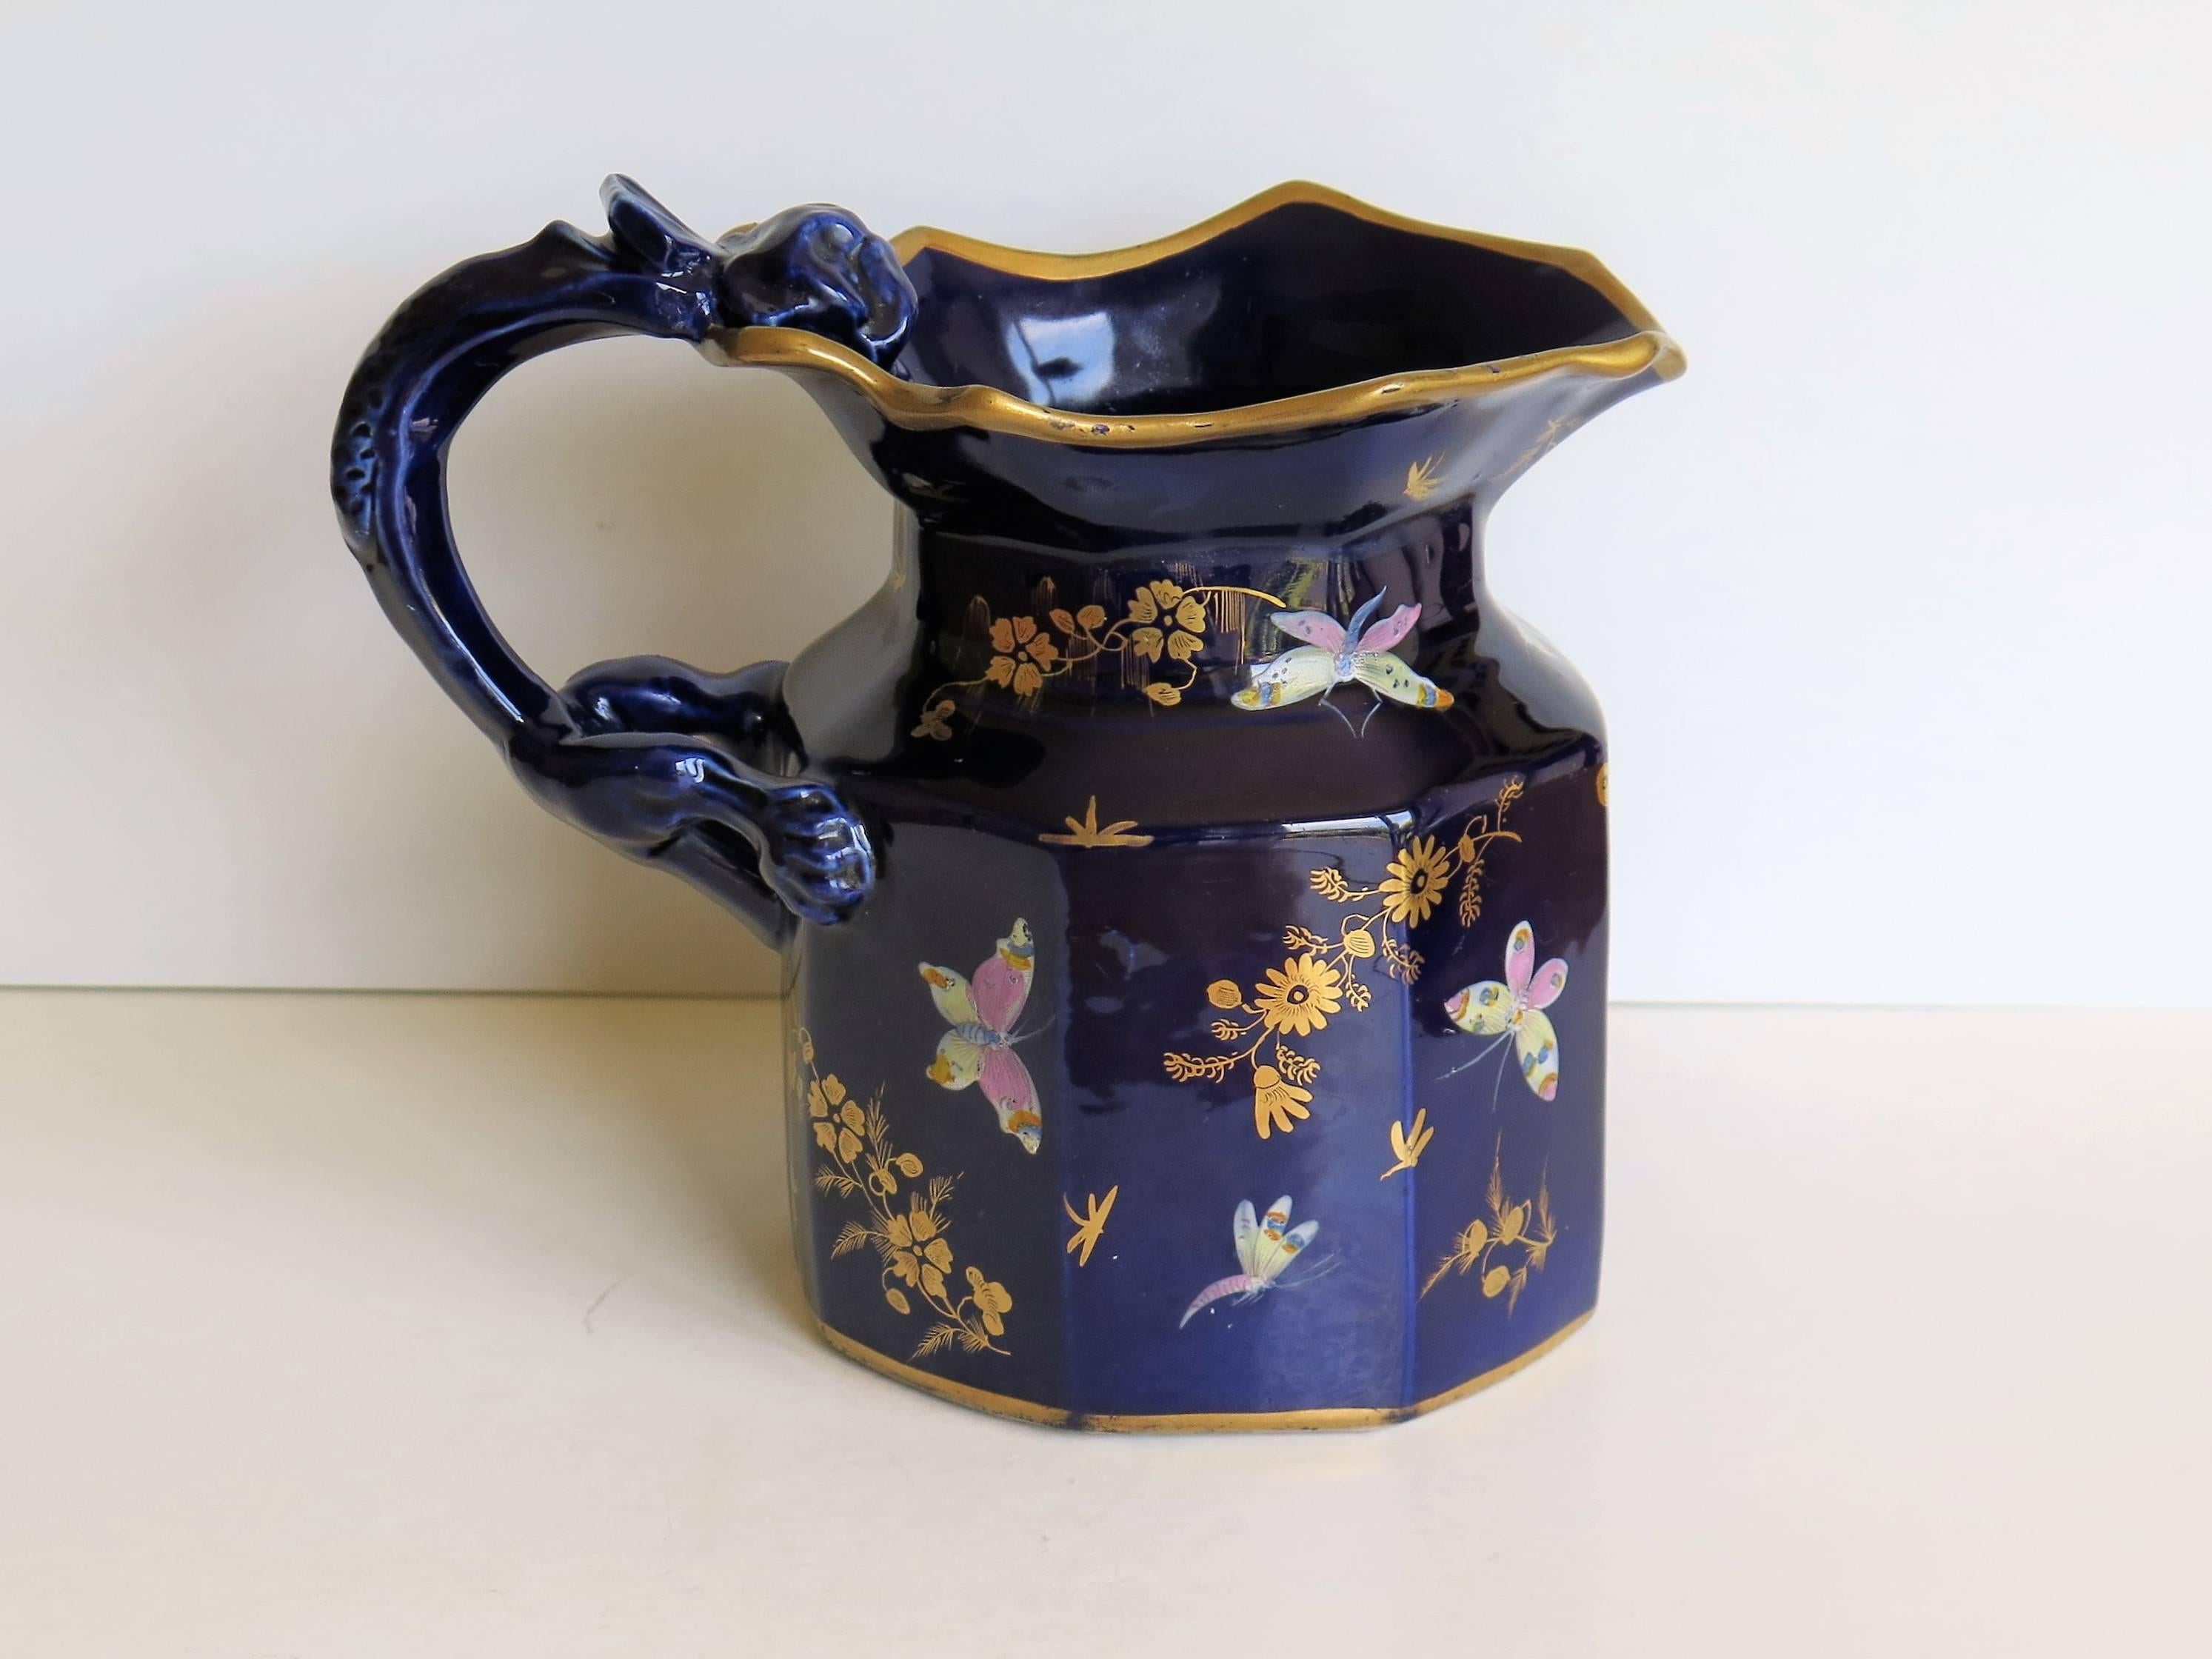 English Early Mason's Jug or Pitcher, Ironstone, Hand-Painted Butterflies, circa 1825